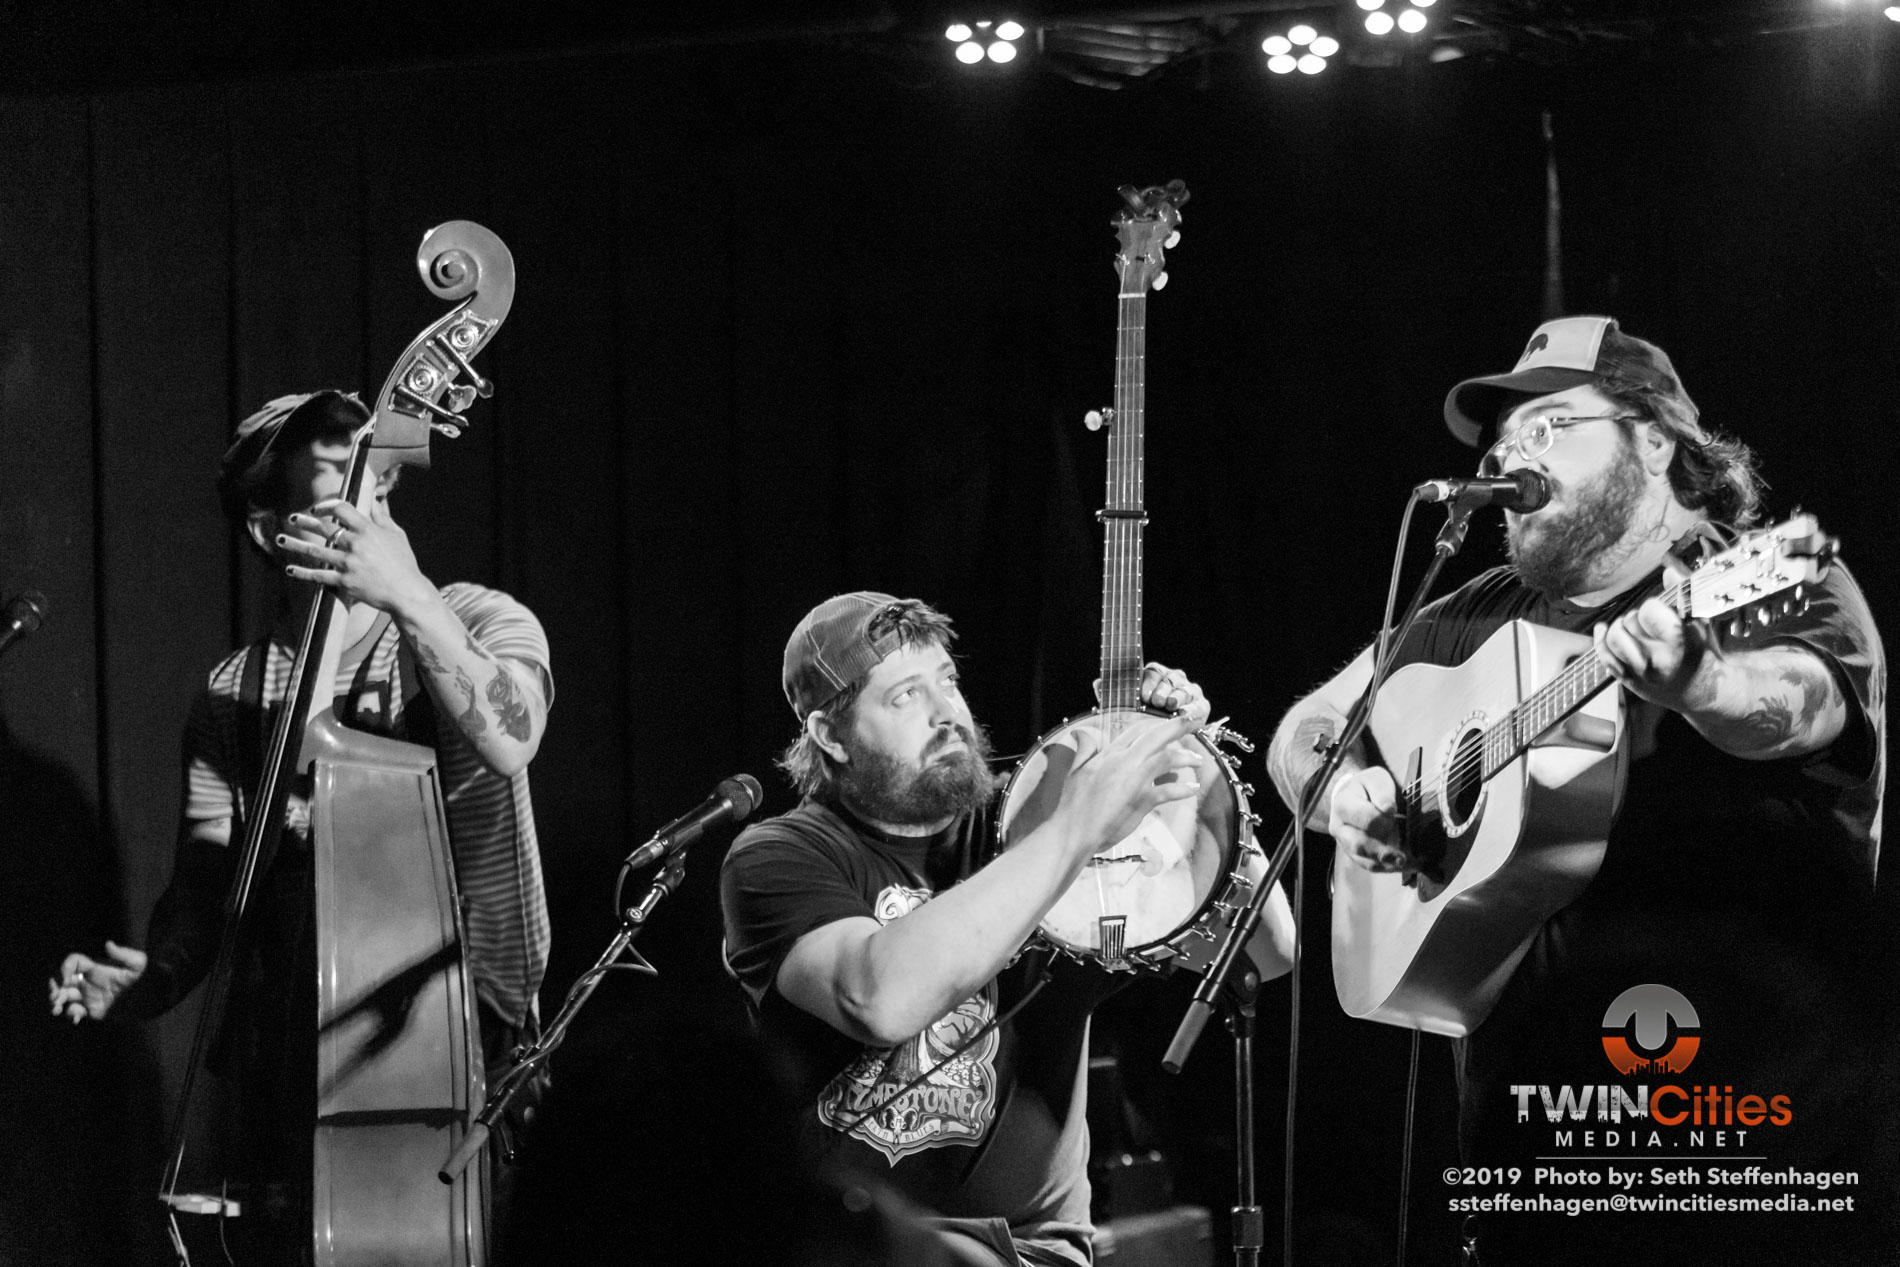 May 2, 2019 - Minneapolis, Minnesota, United States -  Tejon Street Corner Thieves live in concert at the 7th Street Entry opening for Bridge City Sinners.

(Photo by Seth Steffenhagen/Steffenhagen Photography)